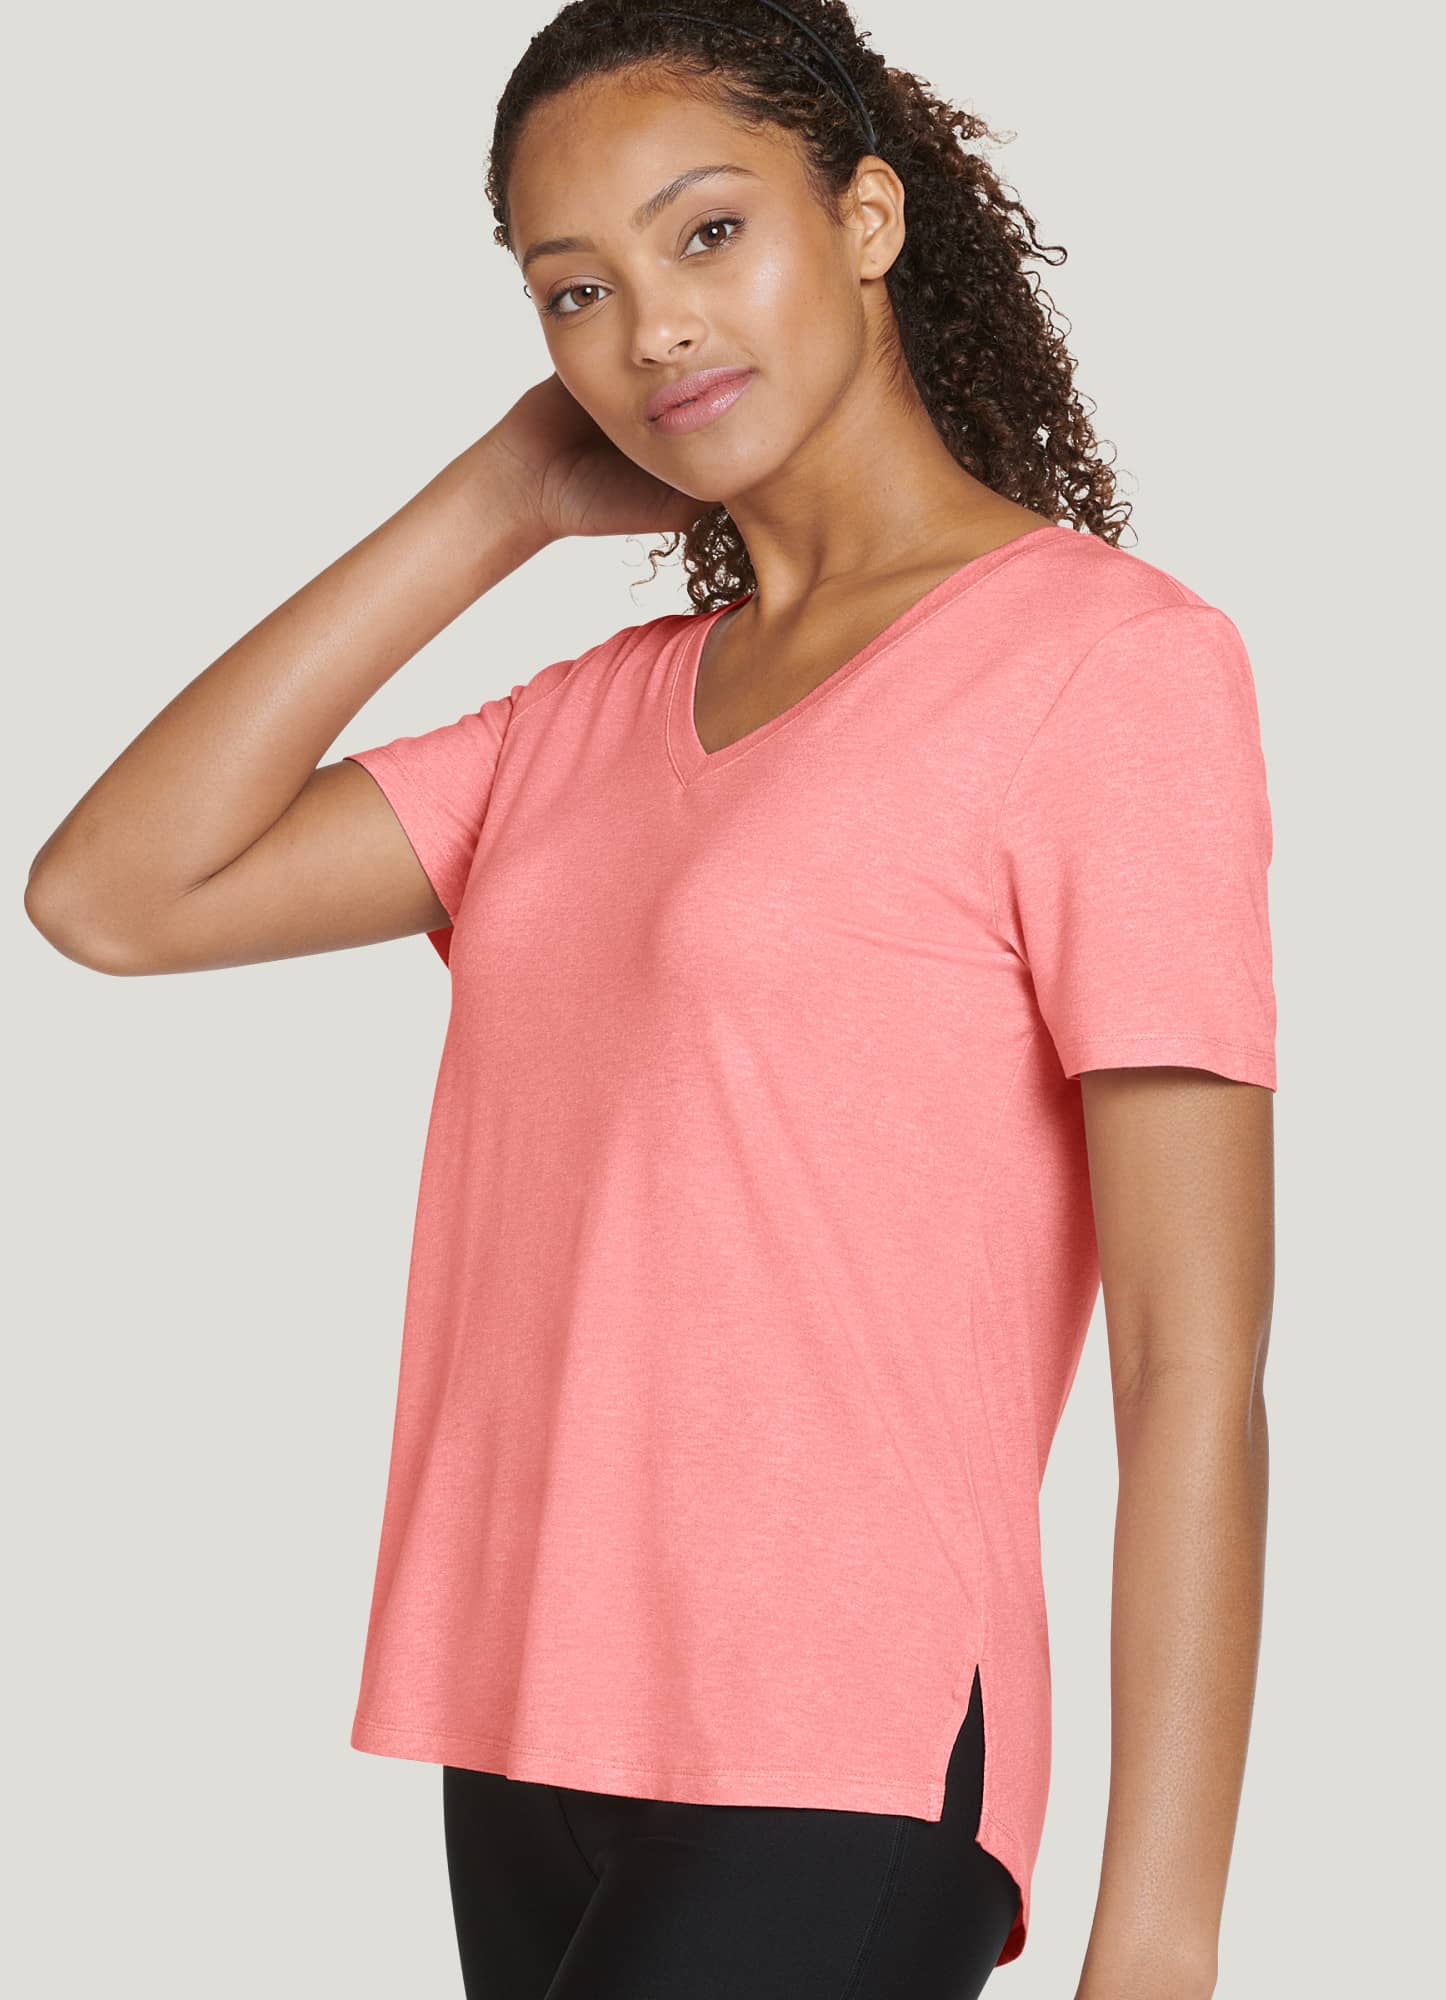 1X 2X 3X Ribbed V Neck or Round Neck Short Sleeve Soft Rayon Top